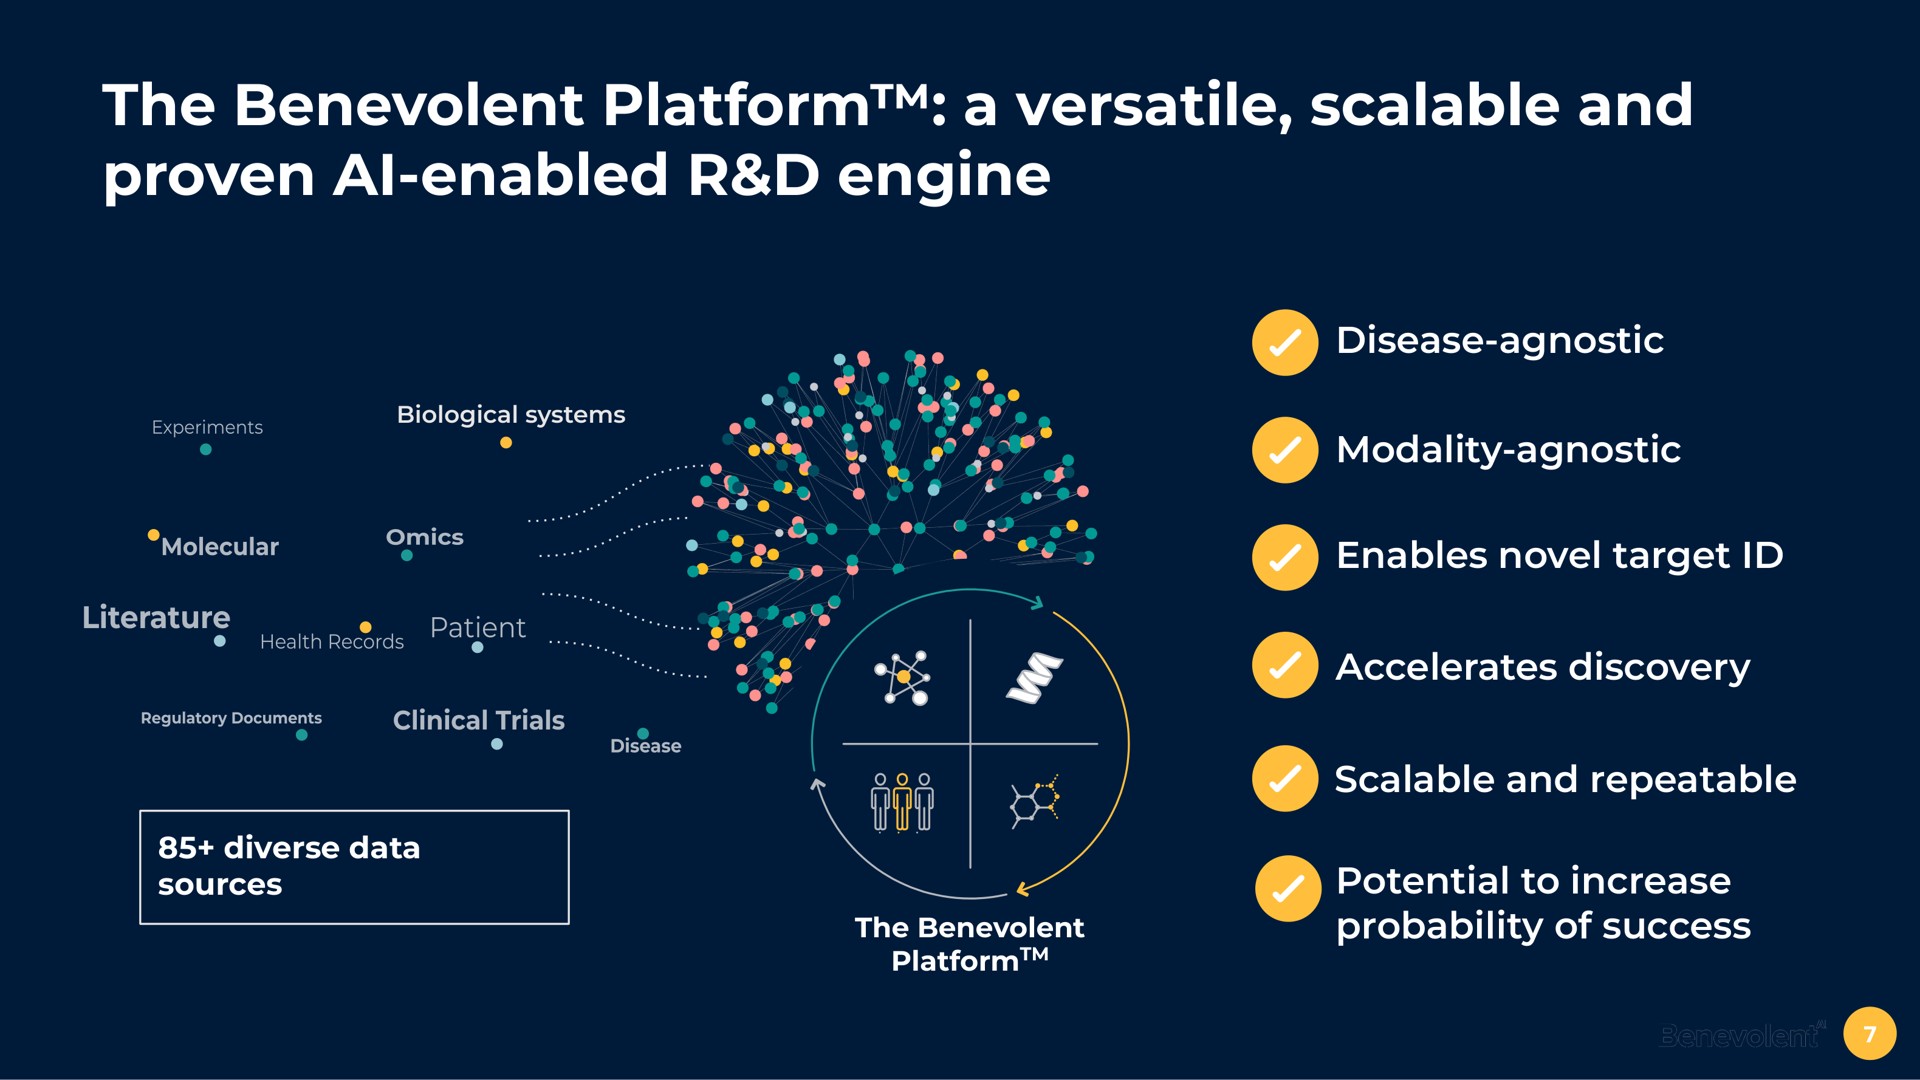 the benevolent platform a versatile scalable and proven enabled engine diverse data sources the benevolent disease agnostic modality agnostic enables novel target accelerates discovery scalable and repeatable potential to increase probability of success enabled | BenevolentAI